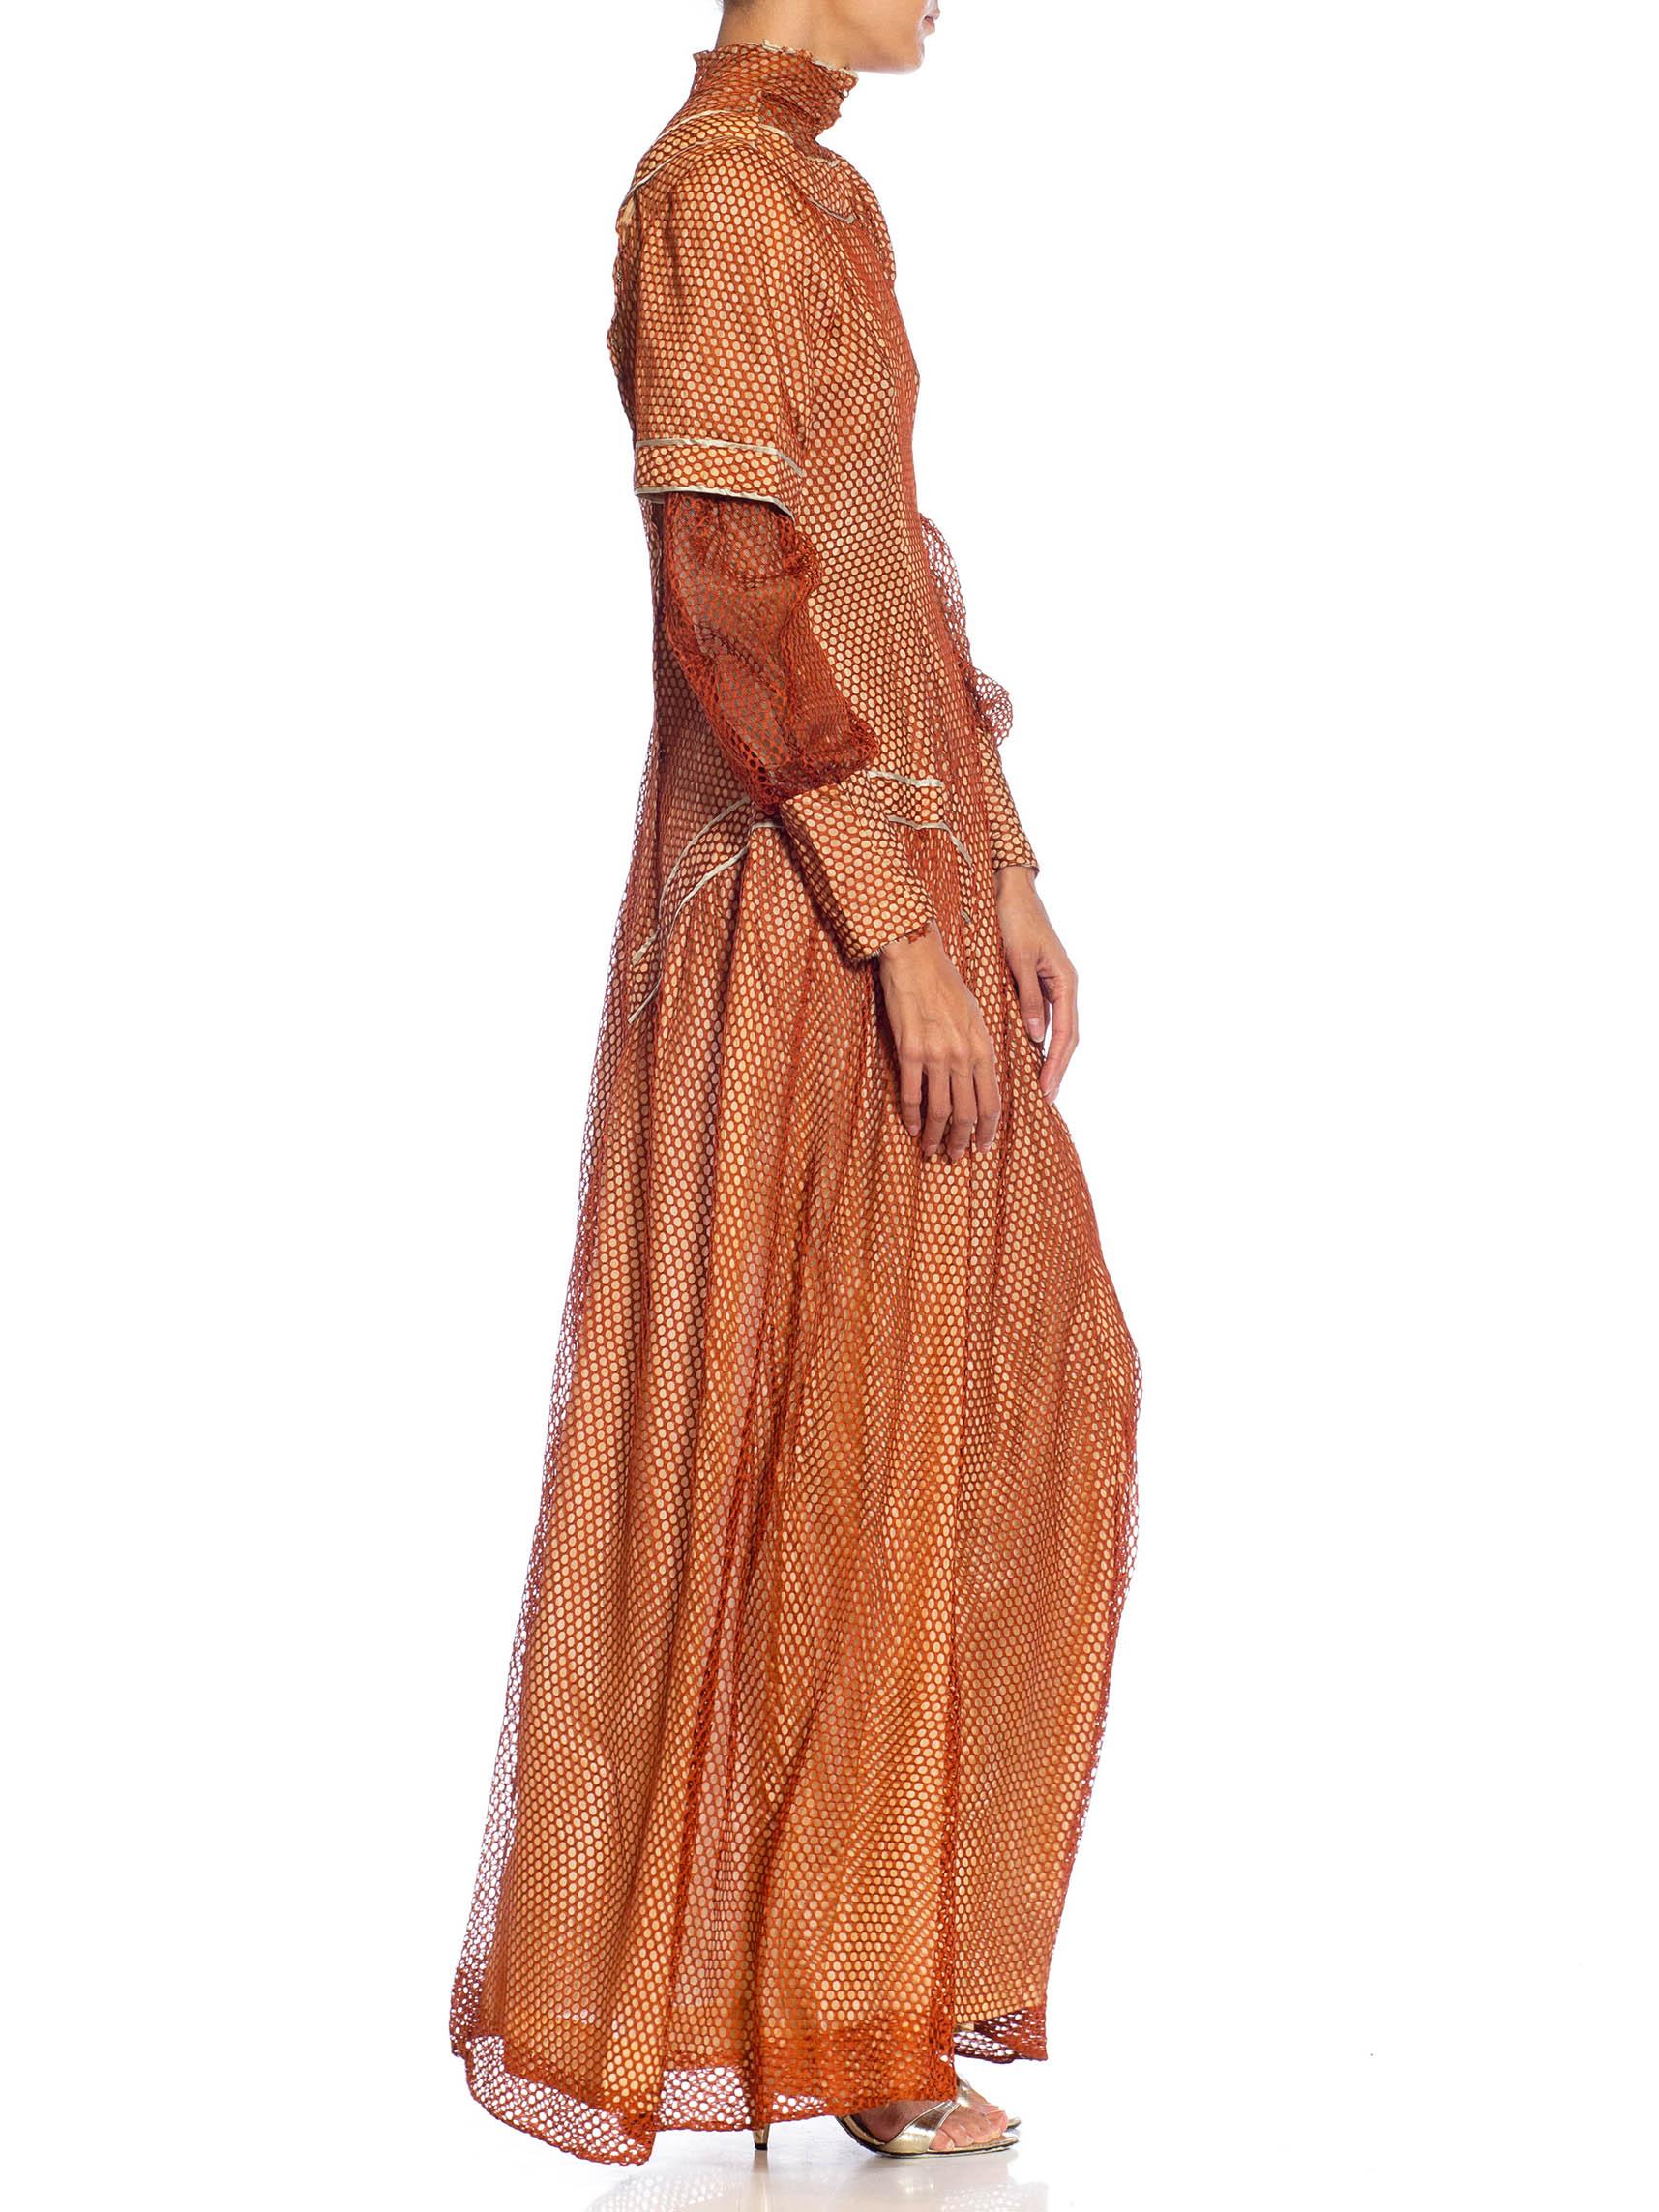 Edwardian Bronze Silk Mesh Over Pale Pink Satin Gown With Long Sleeve In Excellent Condition For Sale In New York, NY